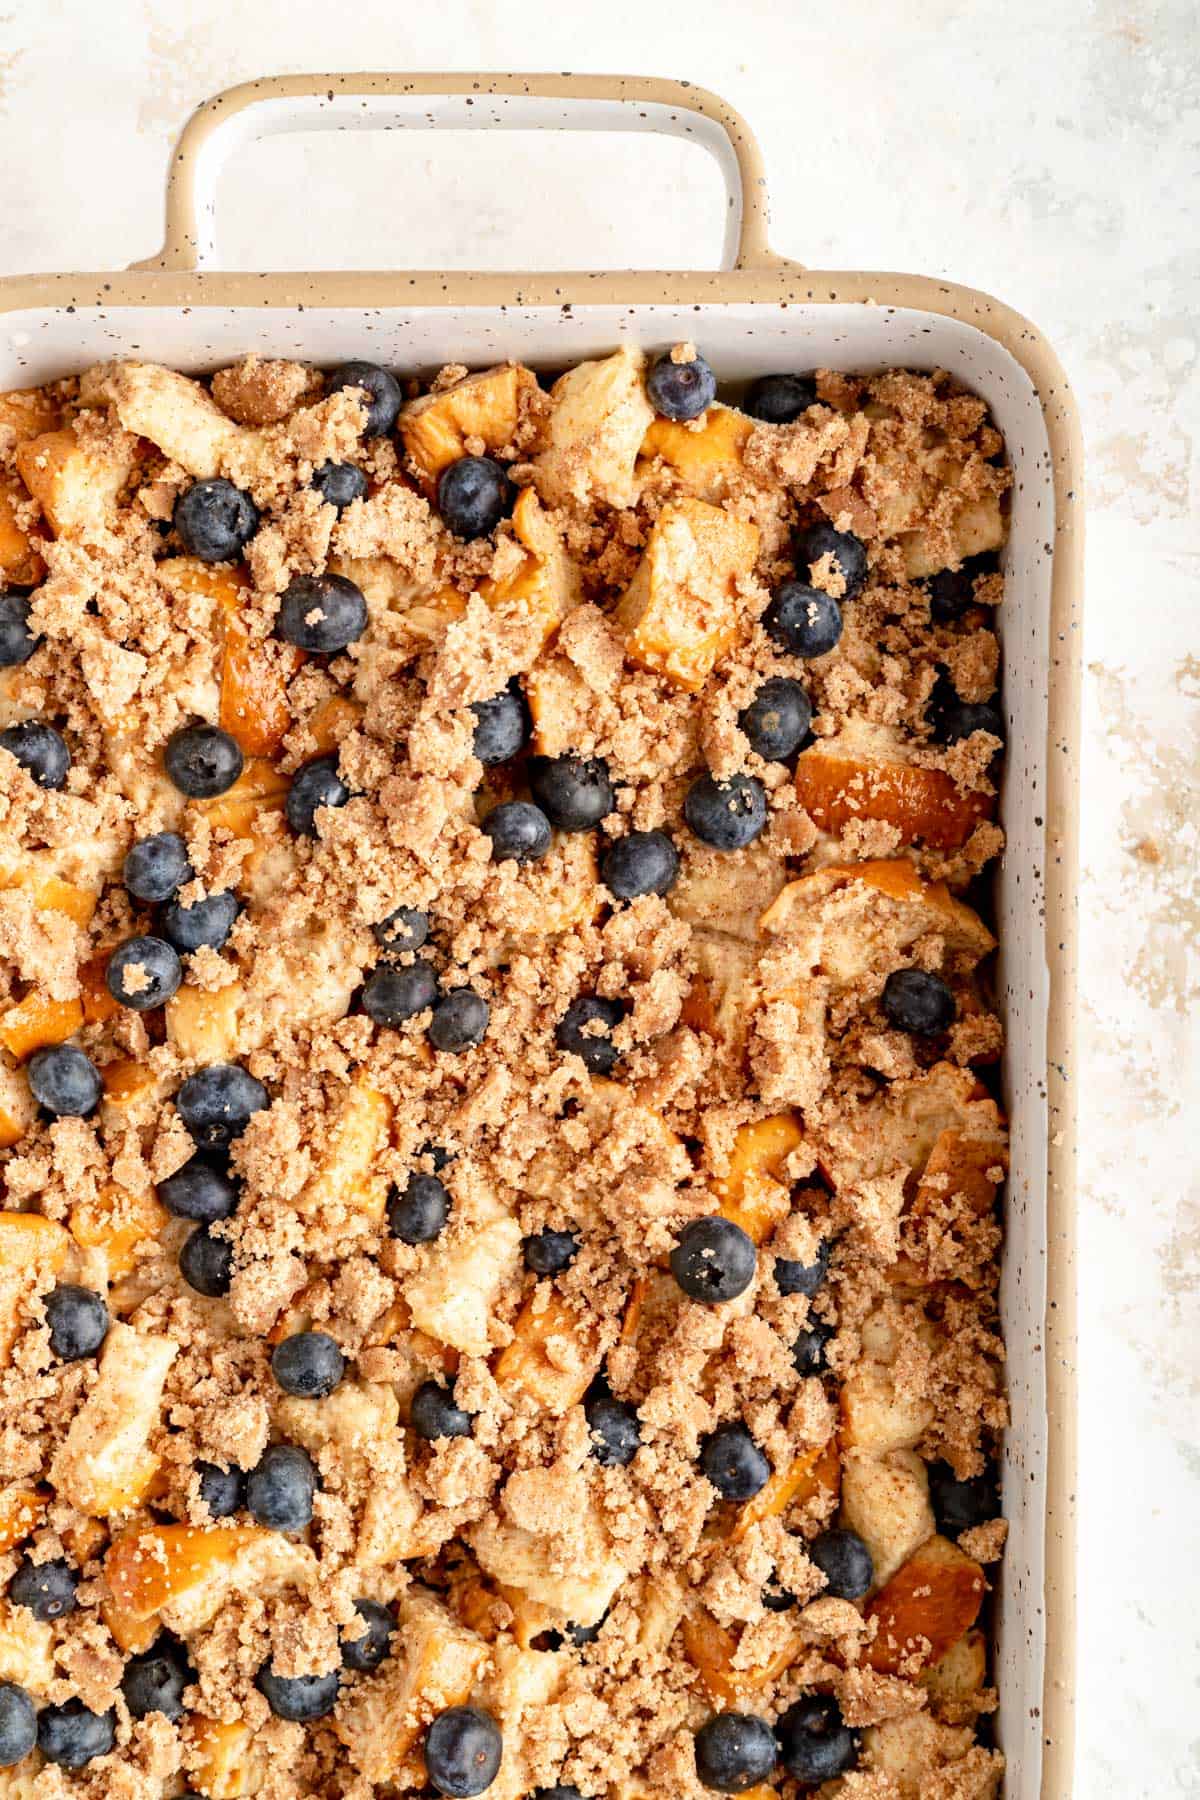 corner of a white and tan ceramic rectangular pan filled with bread chunks, blueberries, and streusel.